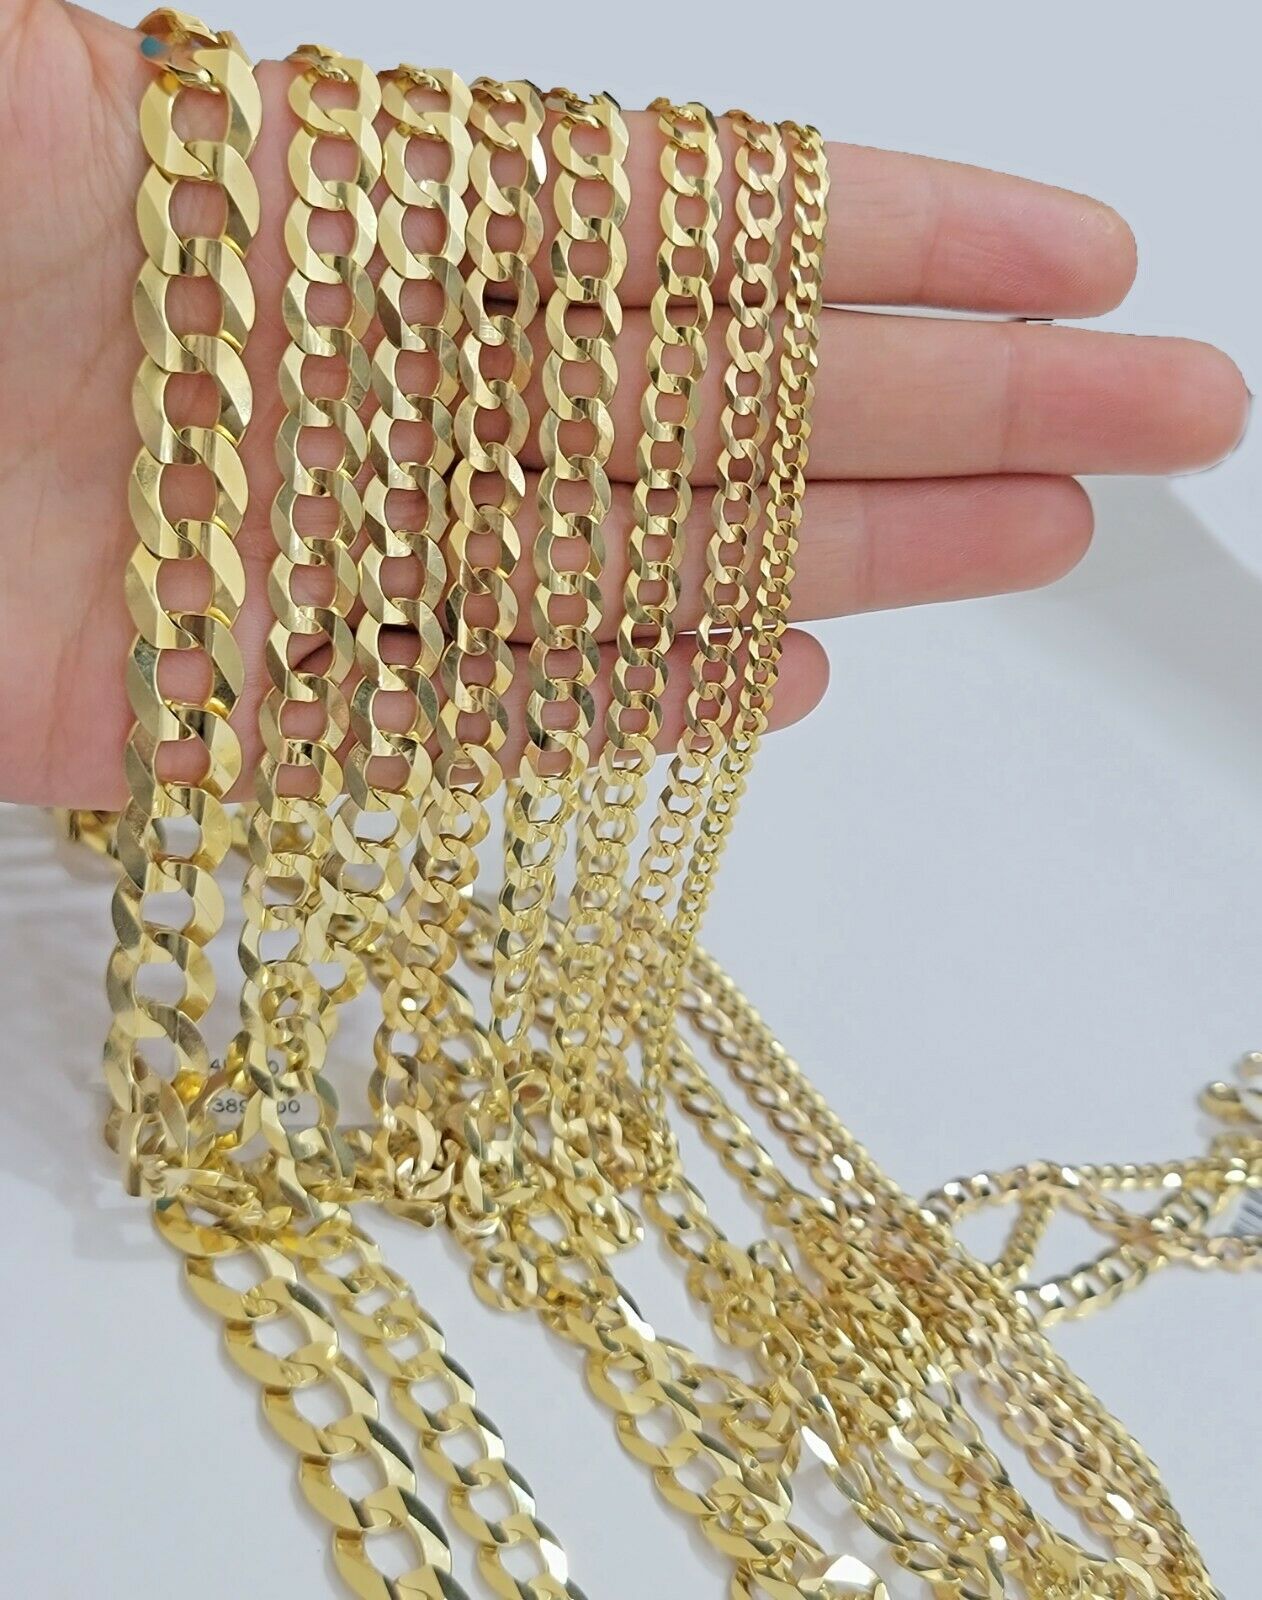 What size Cuban link chain should I get?